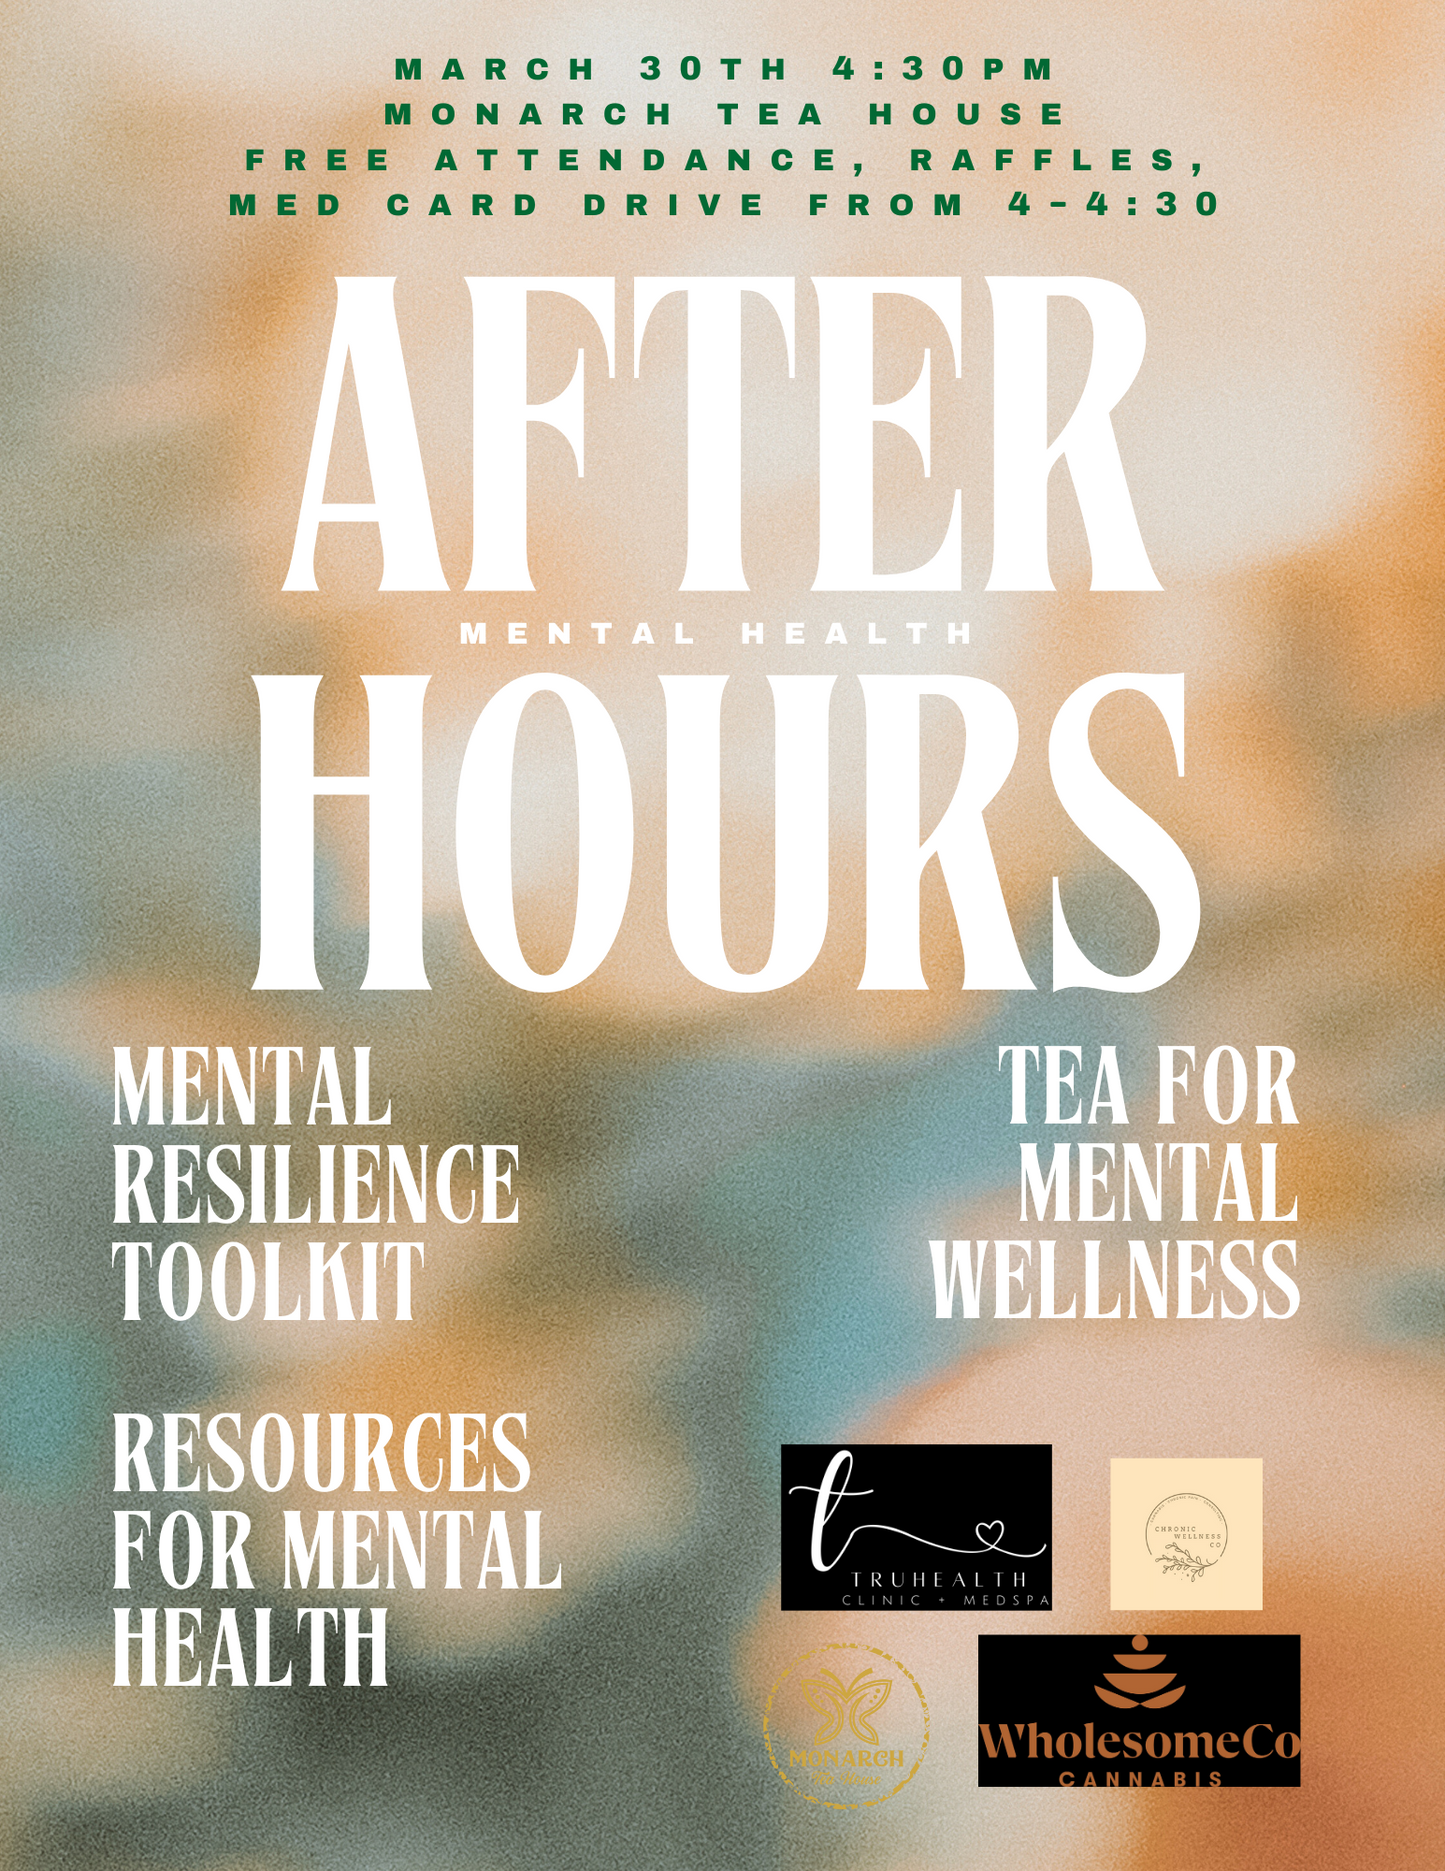 AFTER HOURS SERIES! {Mental Health}